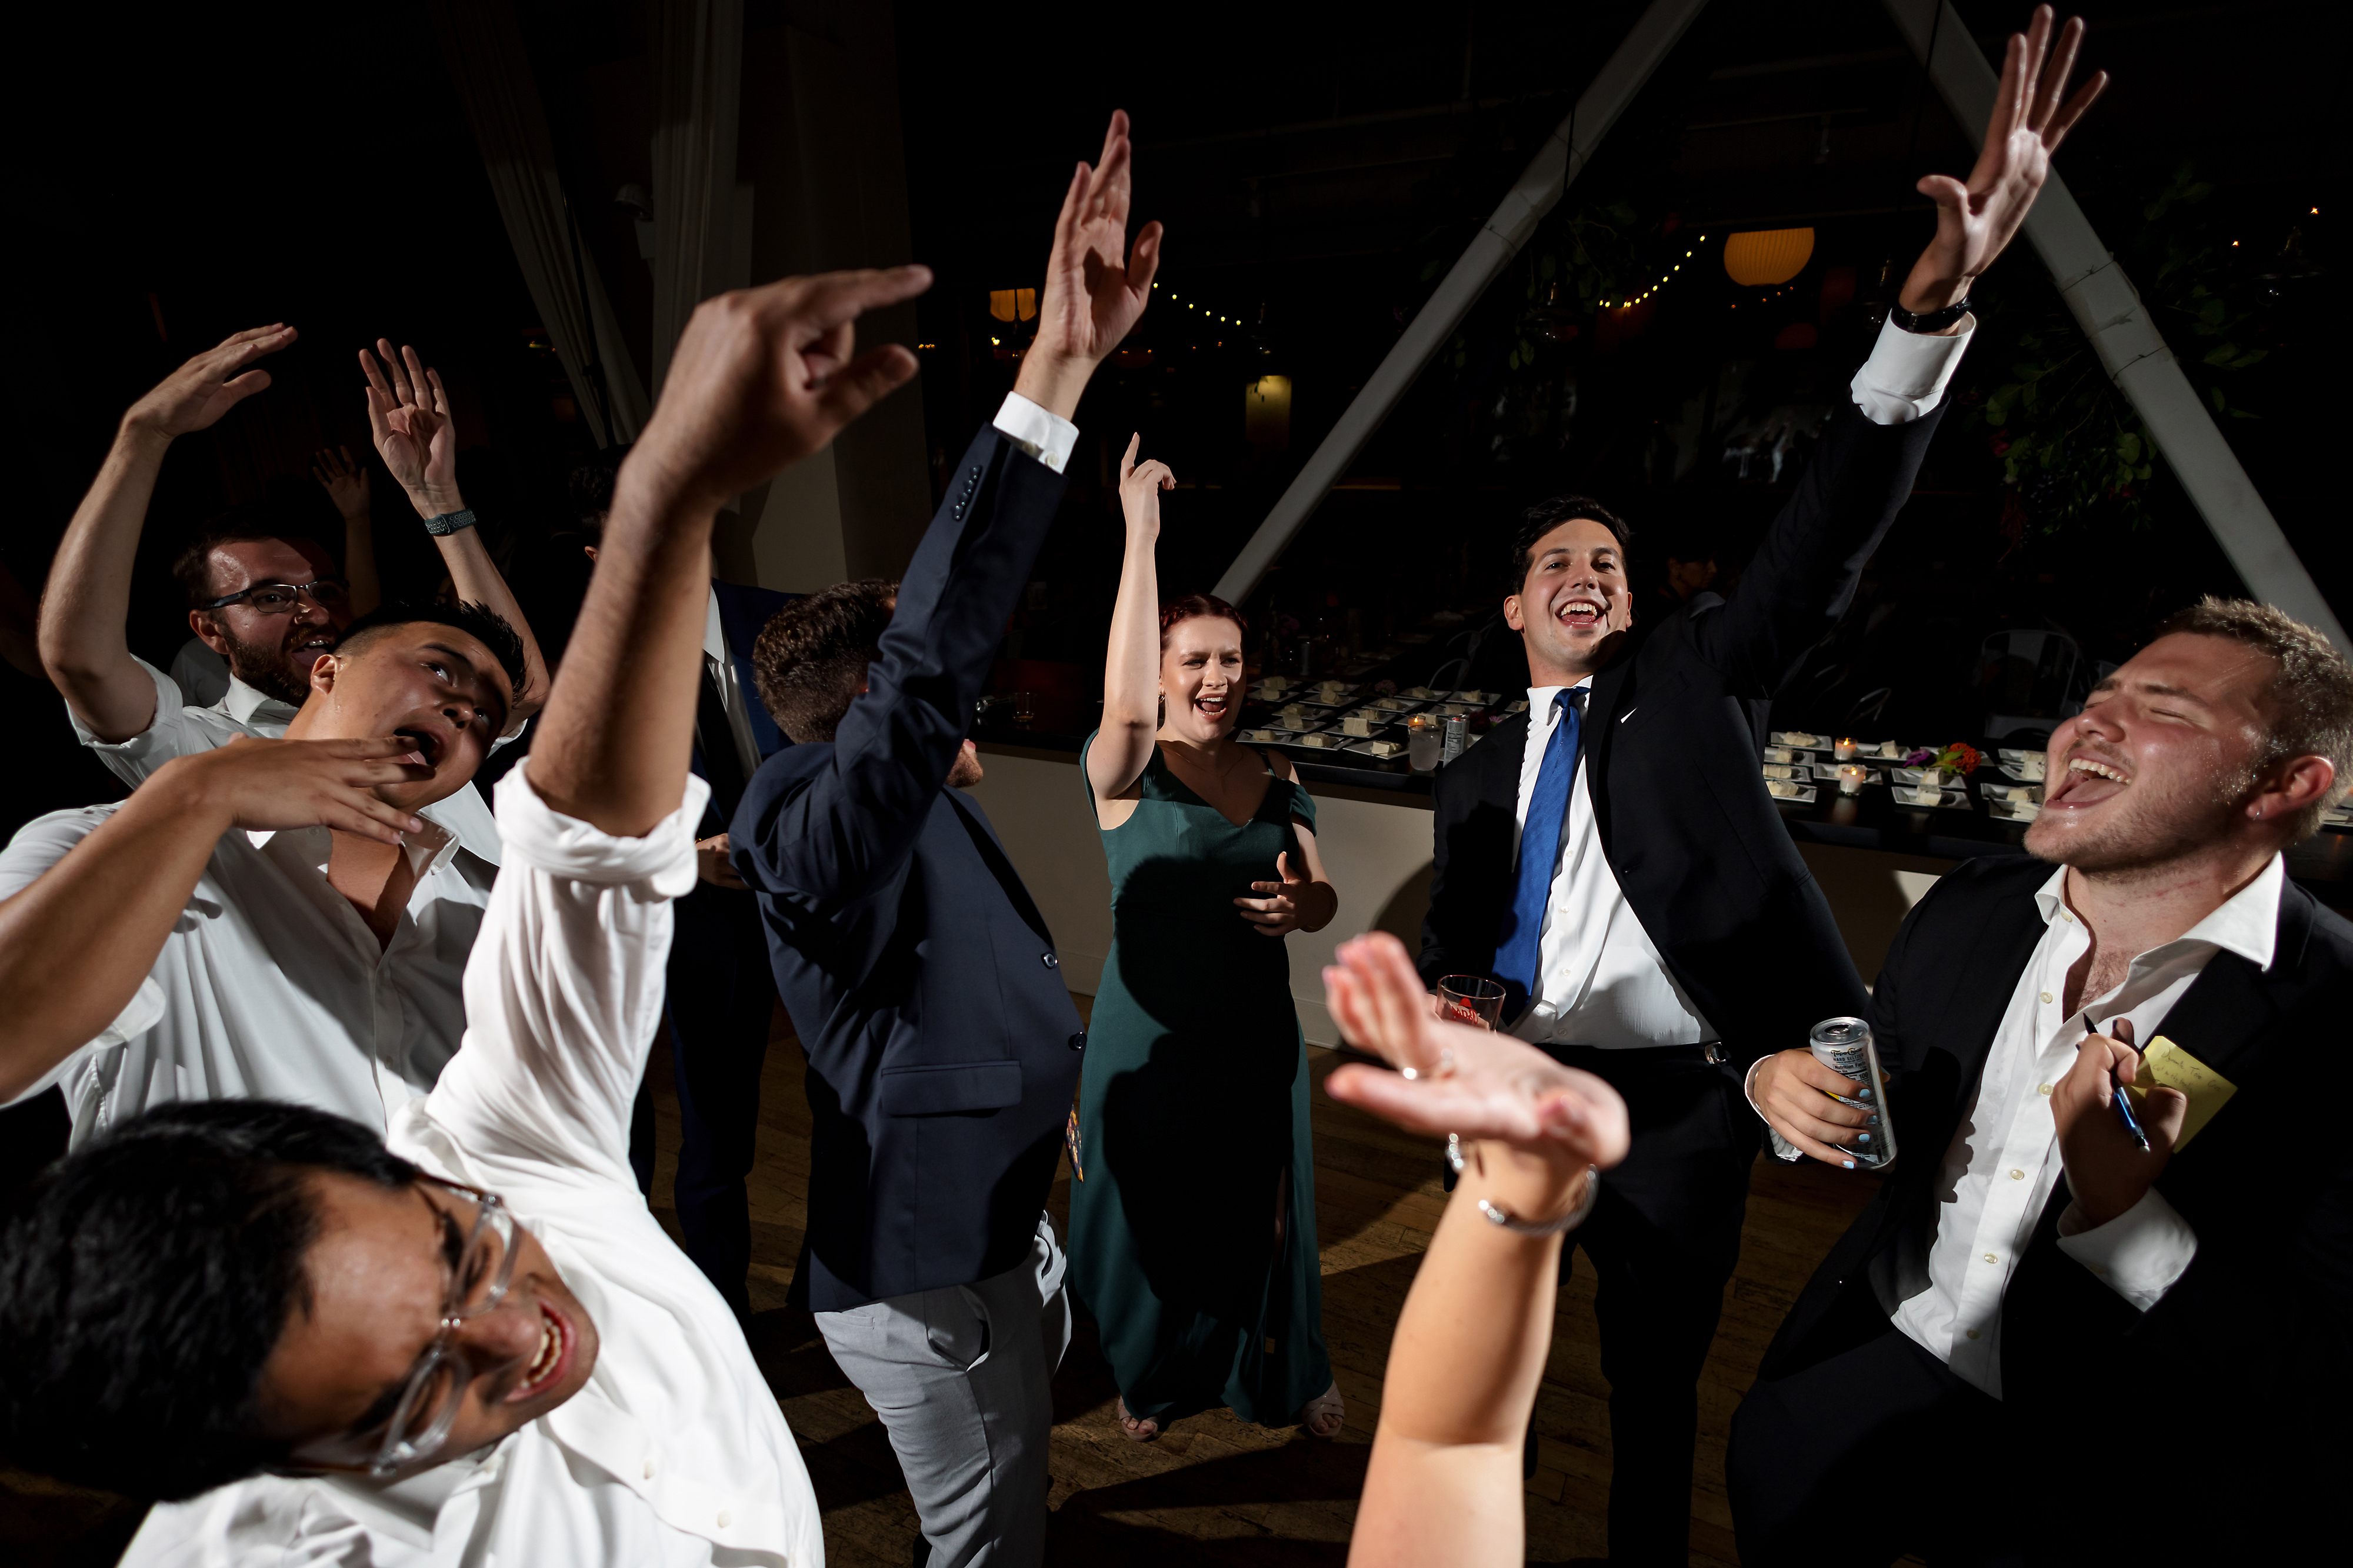 guests dance during wedding reception at Greenhouse Loft in Chicago